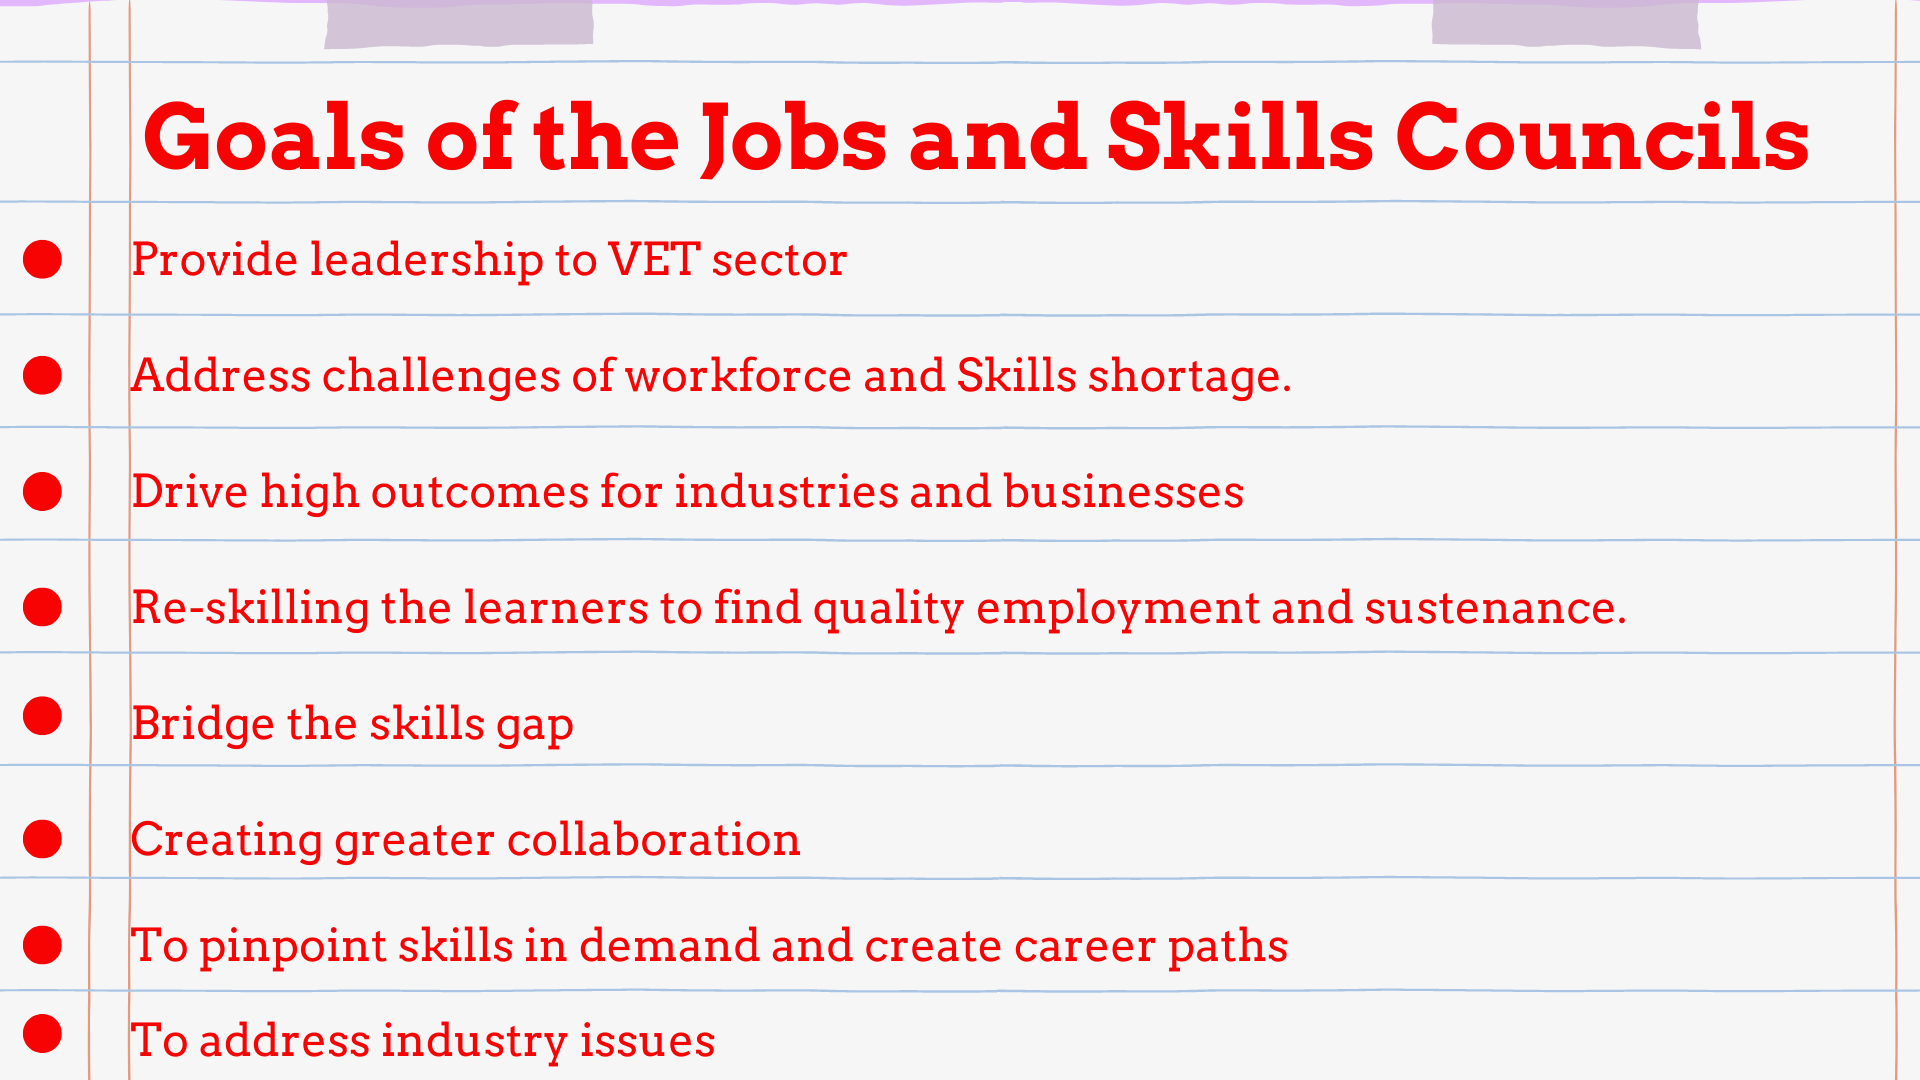 Goals of the Jobs and Skills Councils for workforce training and job growth